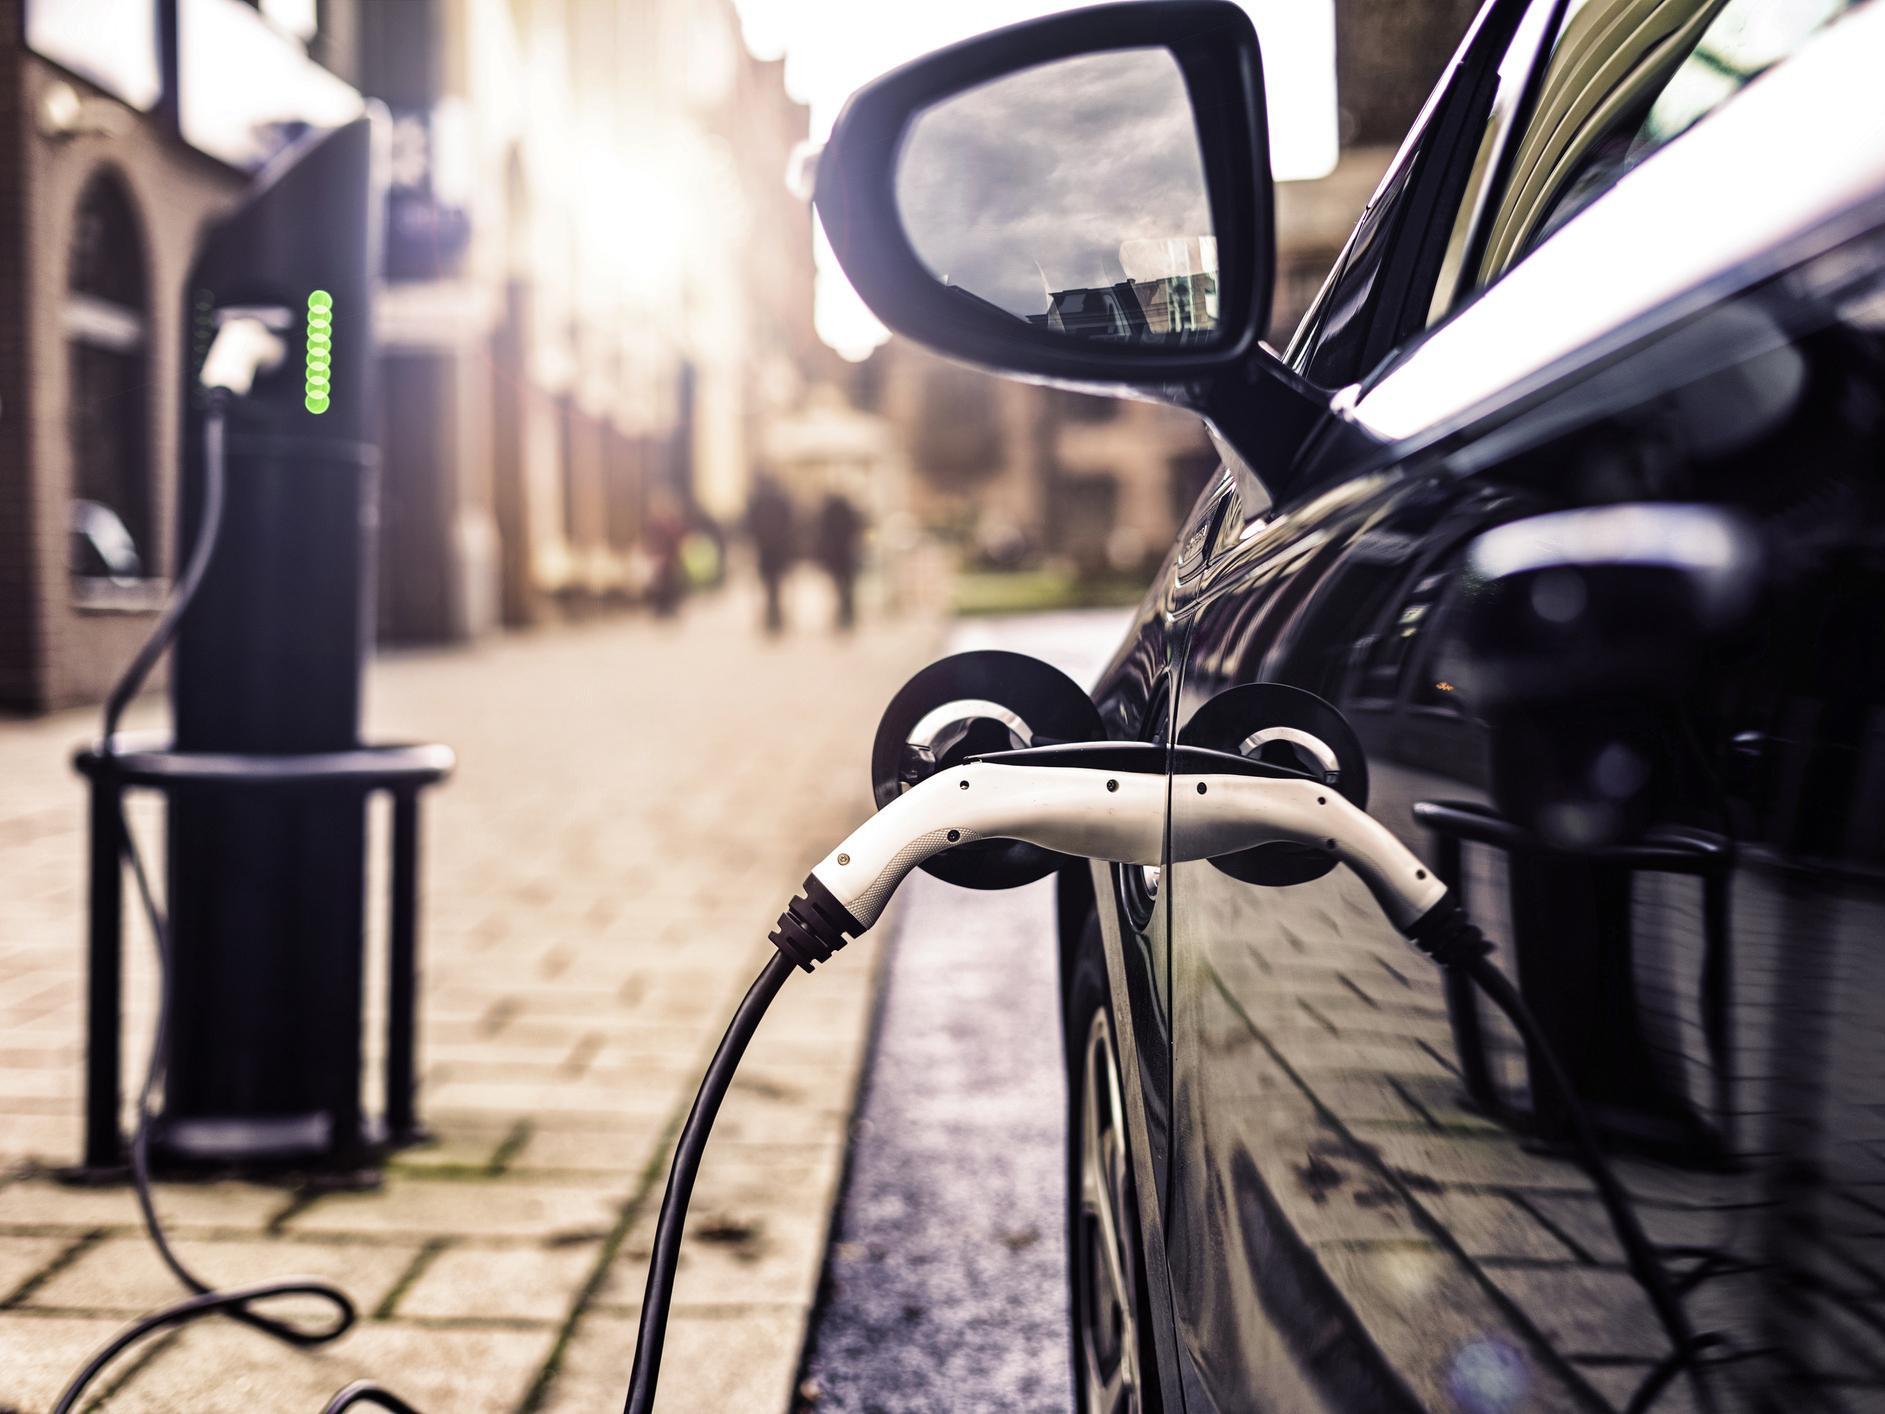 grants-for-on-street-charging-points-for-electric-cars-campaigning